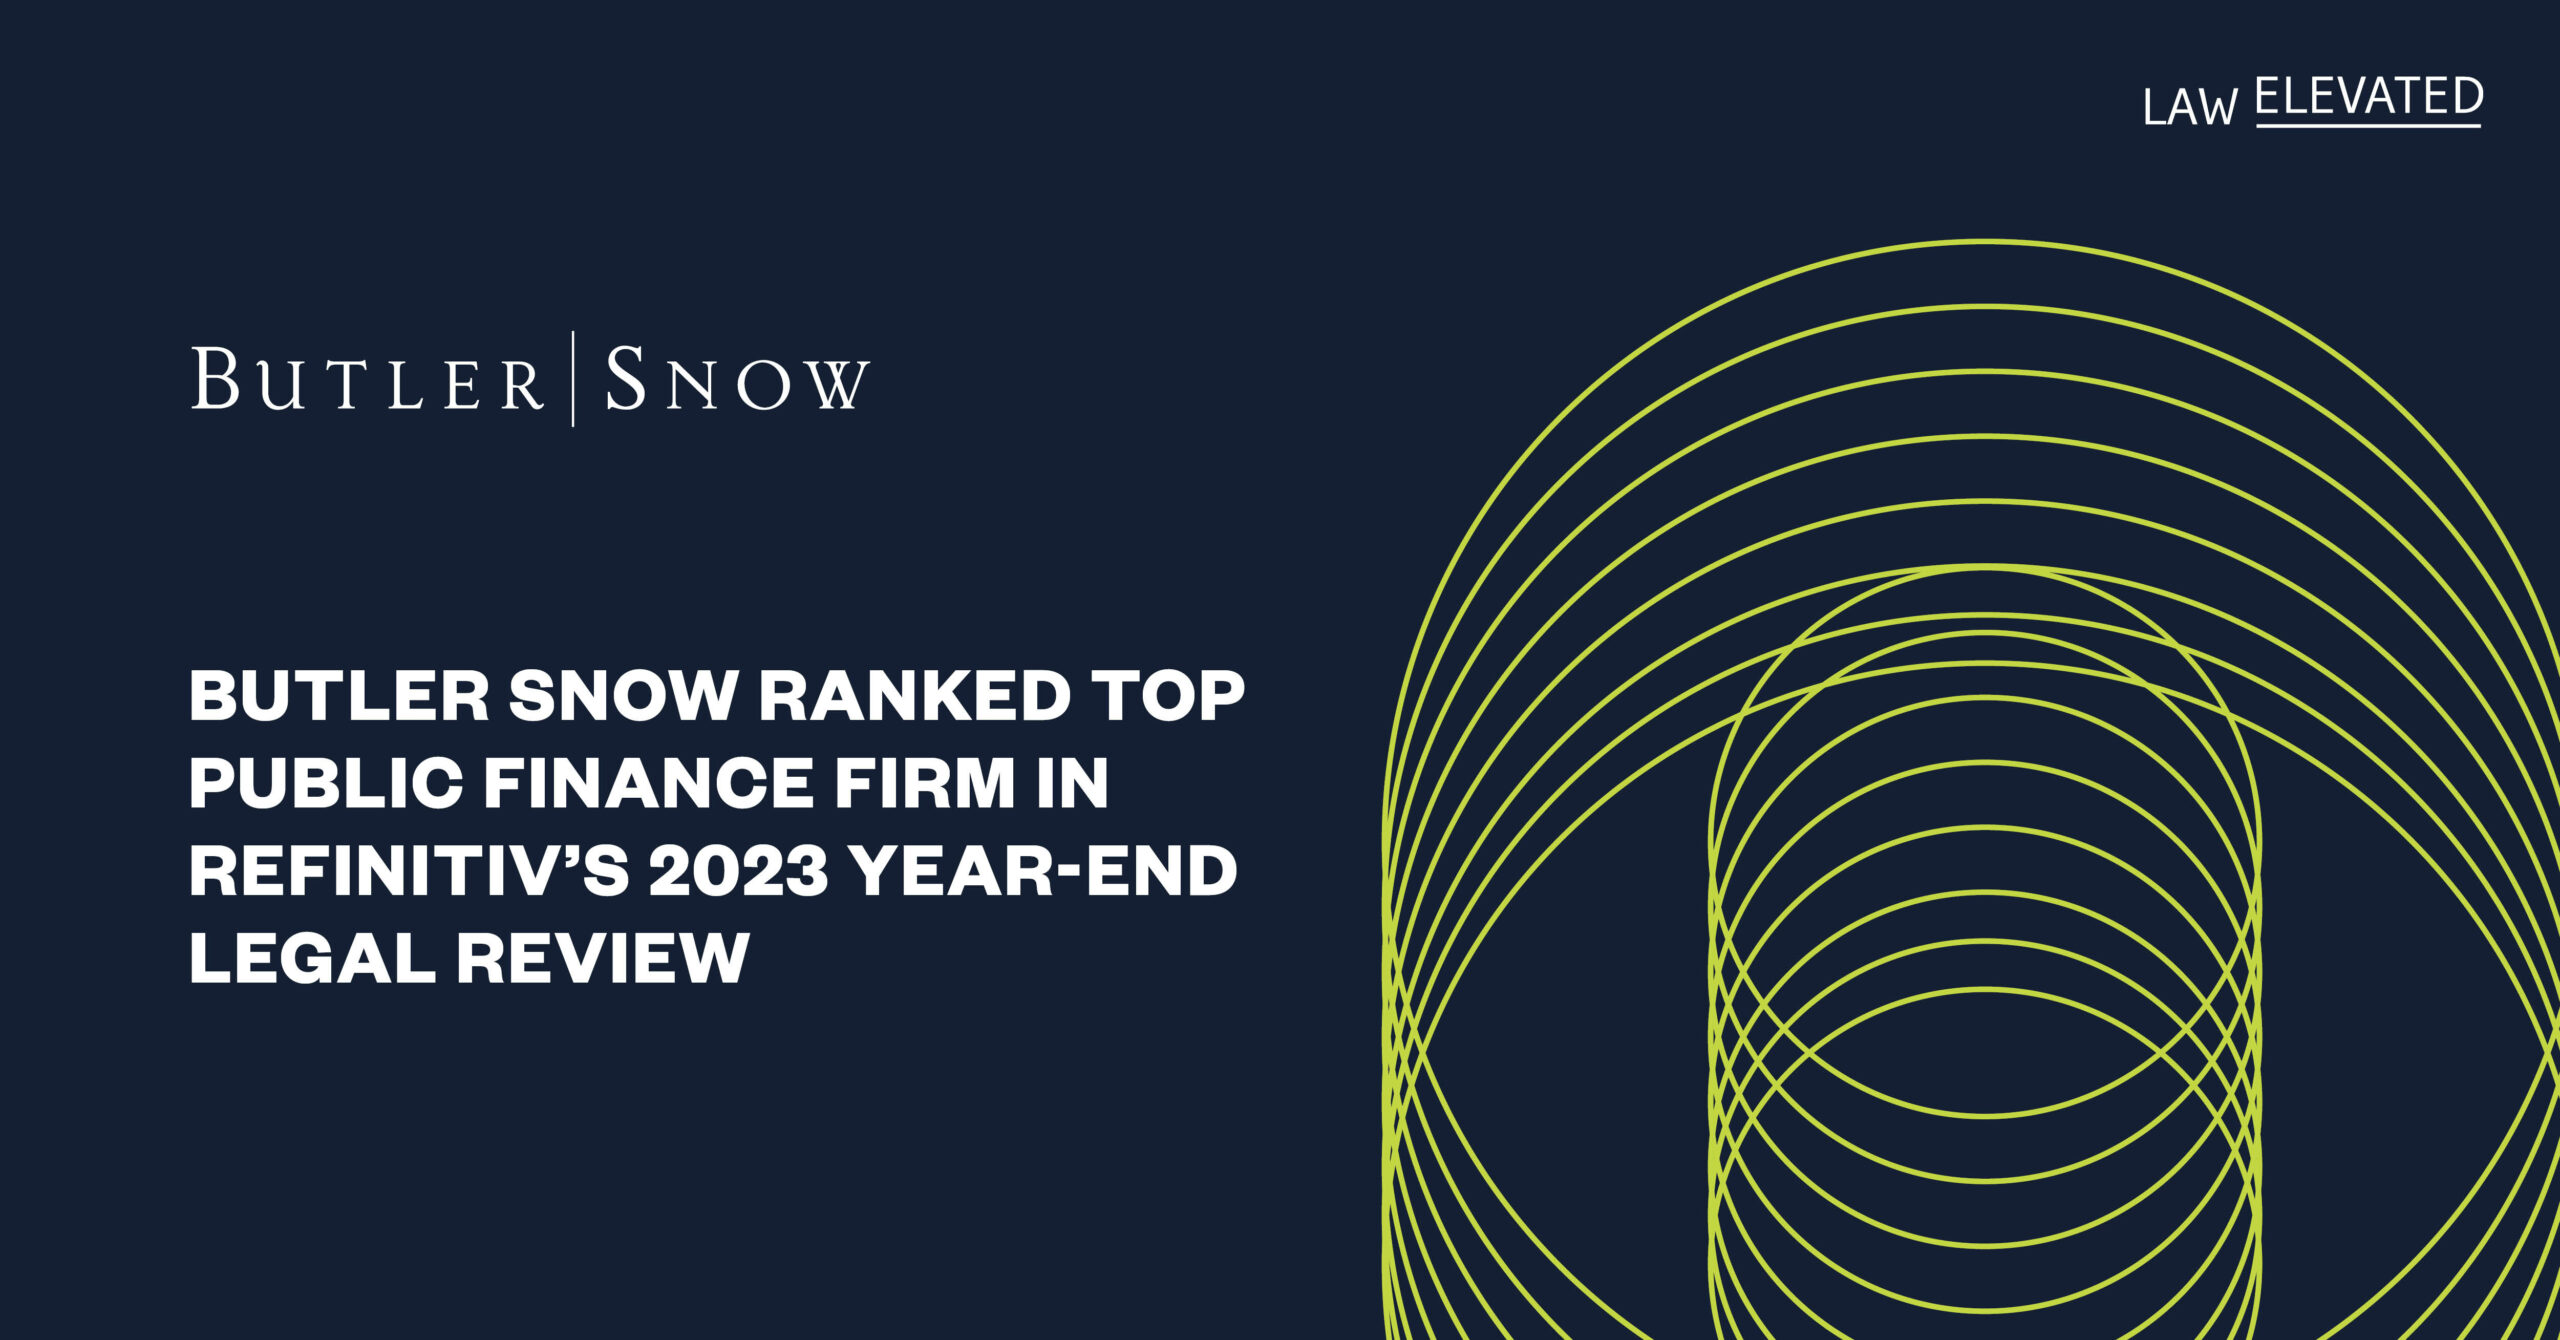 Butler Snow Ranked Top Public Finance Firm in Refinitiv’s 2023 Year-End Legal Review